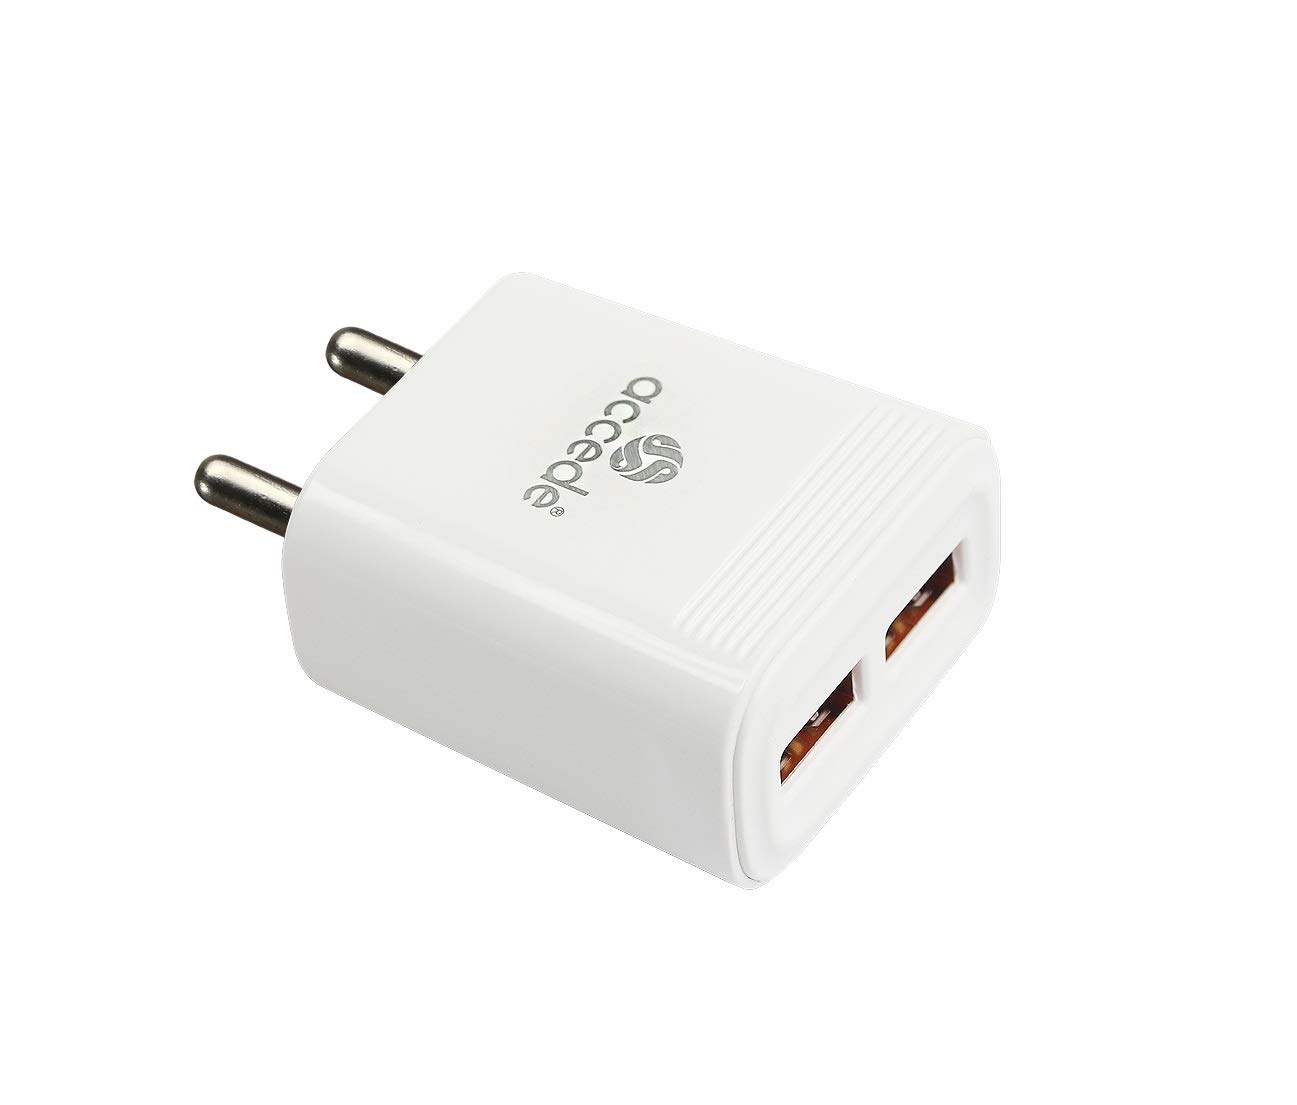 ACCEDE ZAPPER DUAL USB TYPE C CHARGER 2.4A